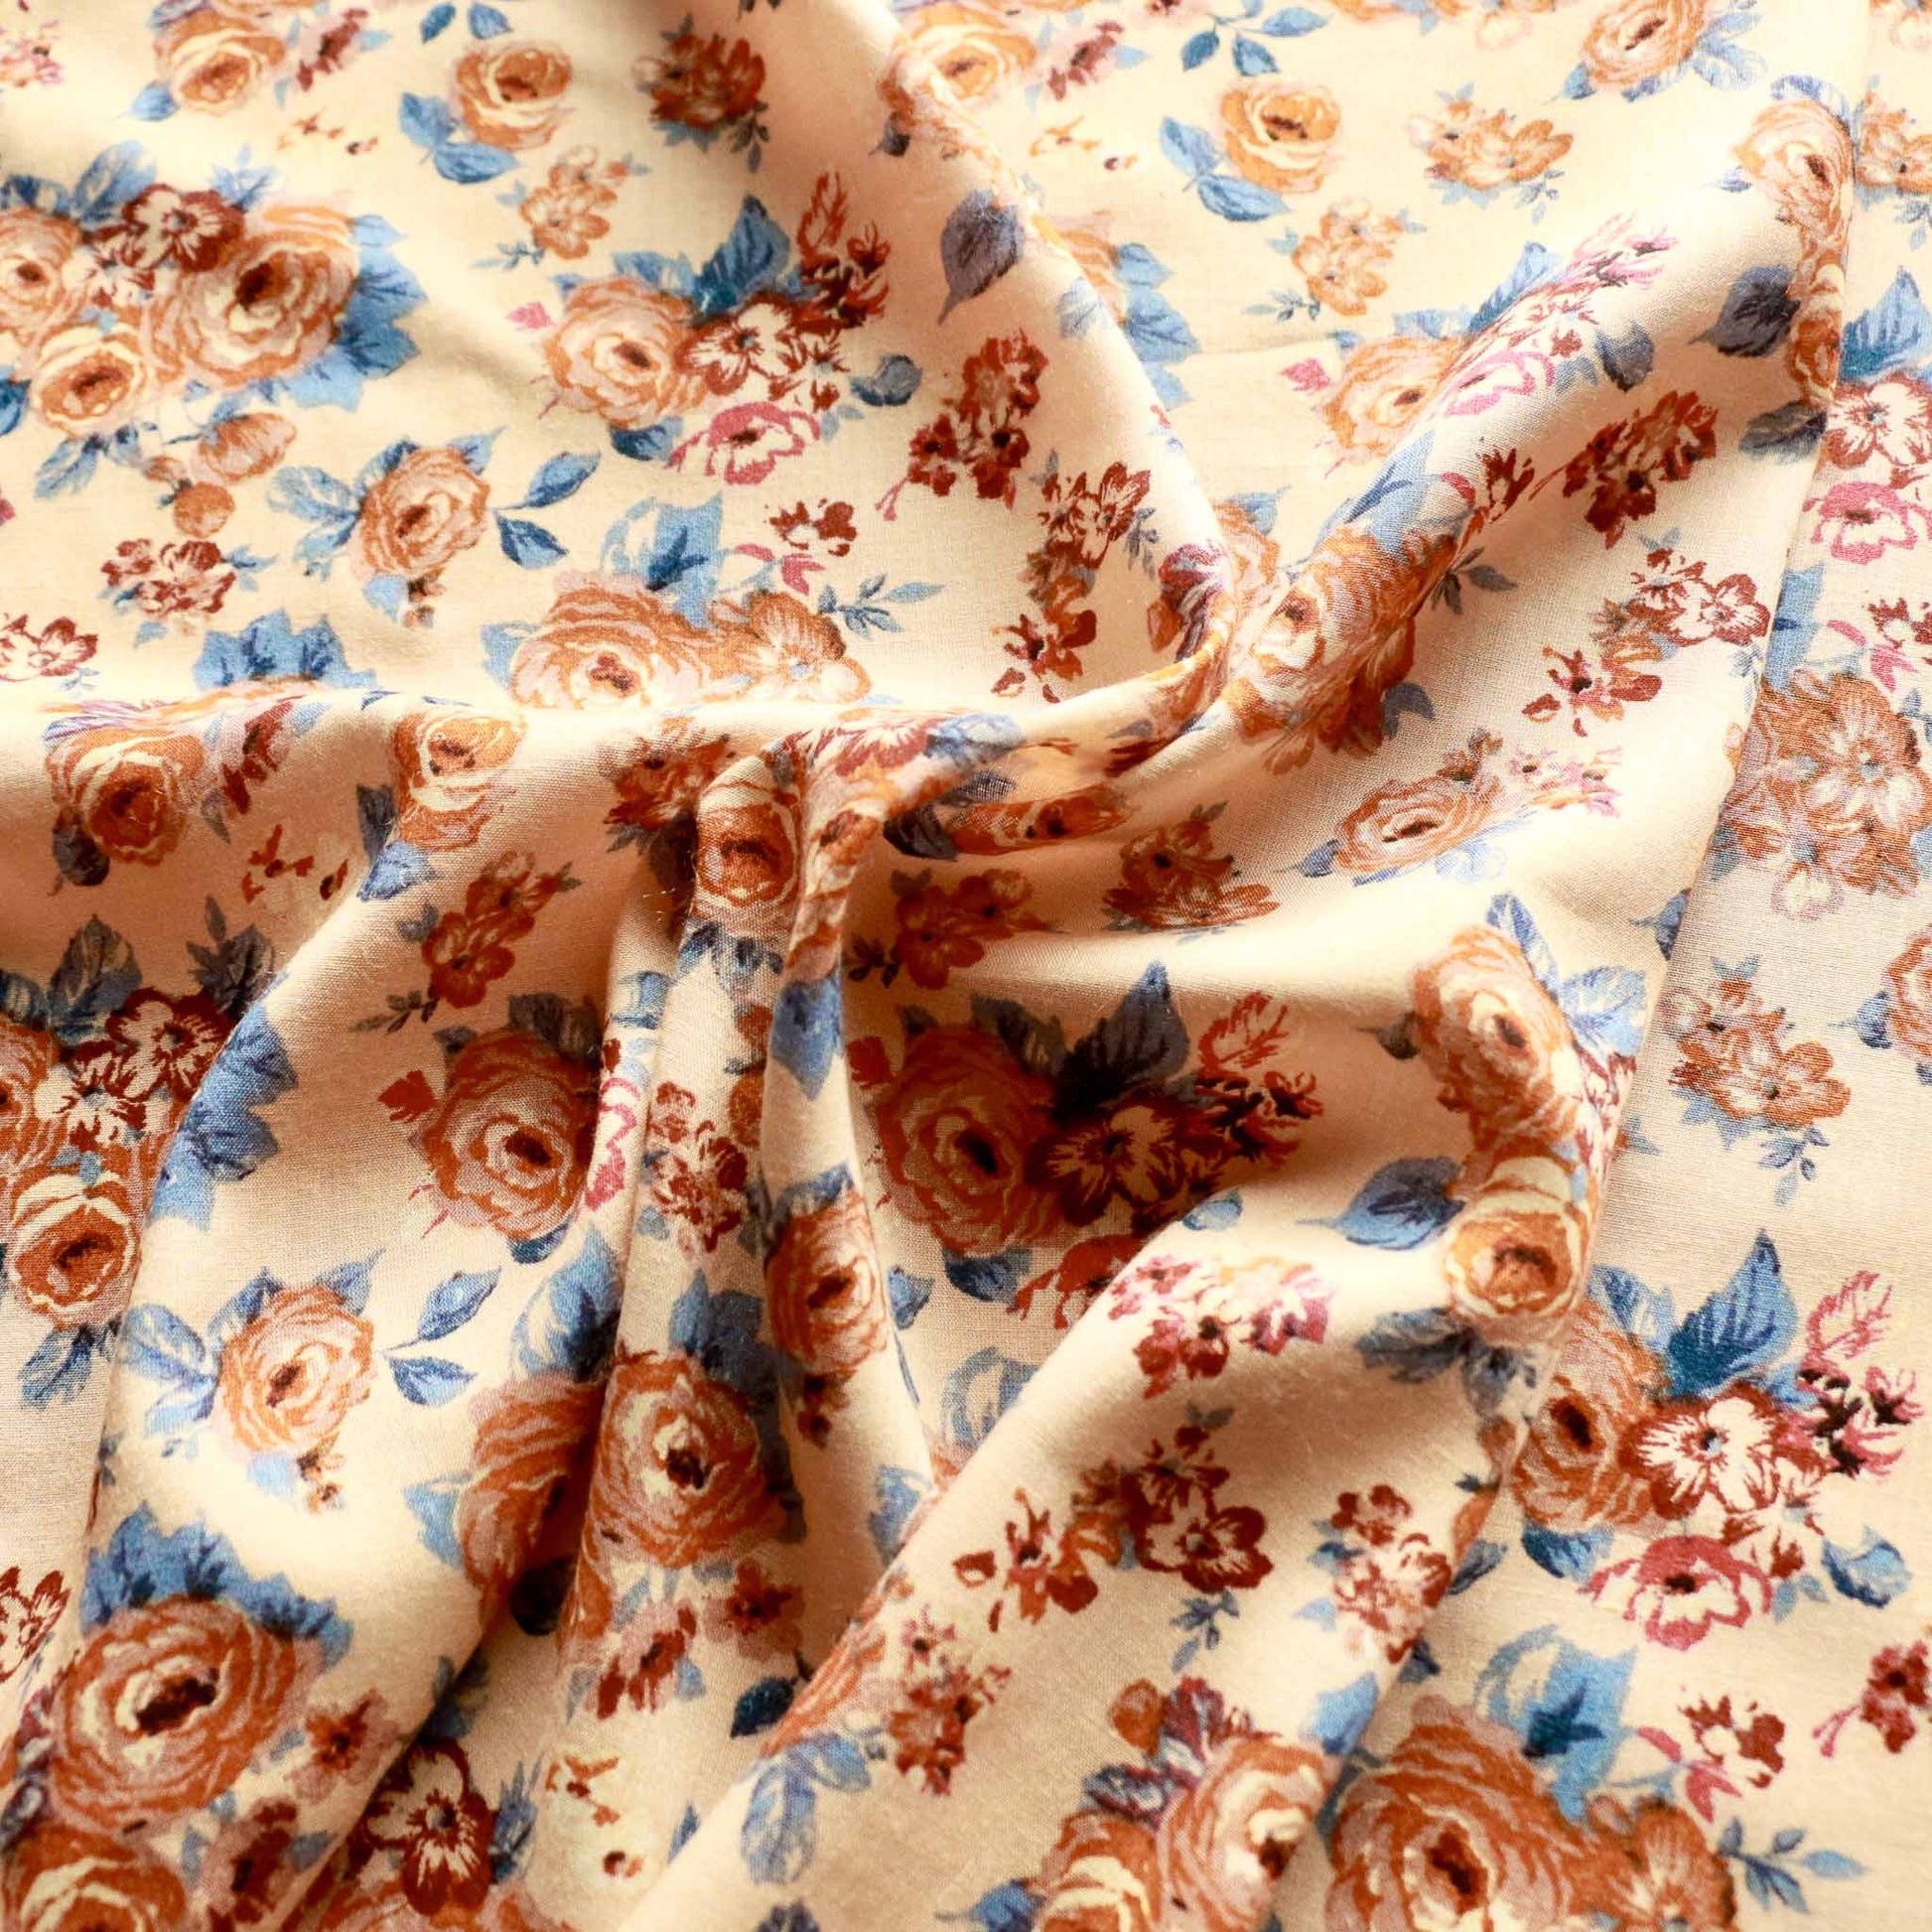 light beige viscose challis dressmaking rayon fabric with classical flowers printed in blue and brown